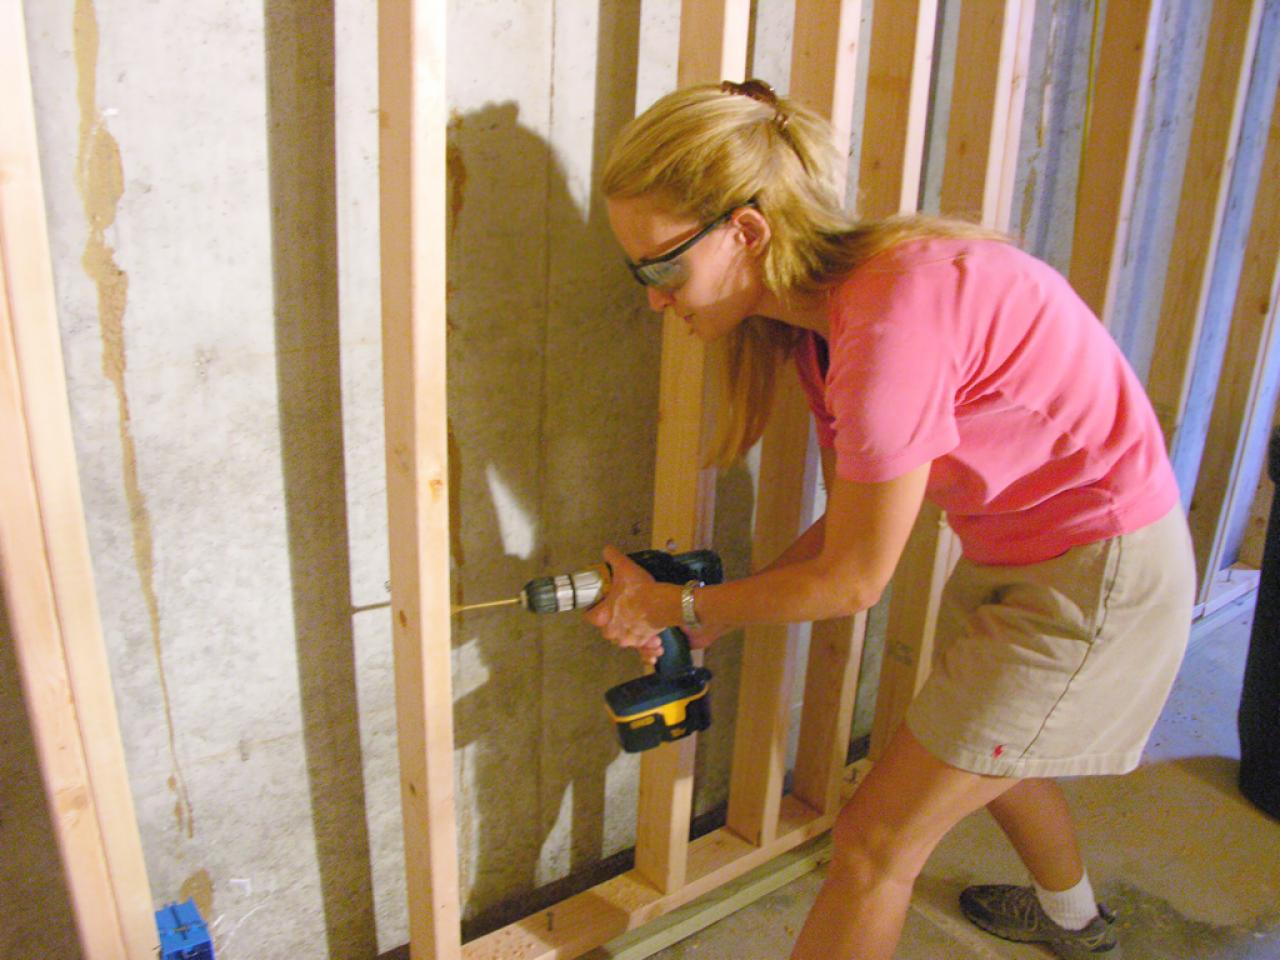 How To Finish Basement Walls, How To Plumb A Basement Wall